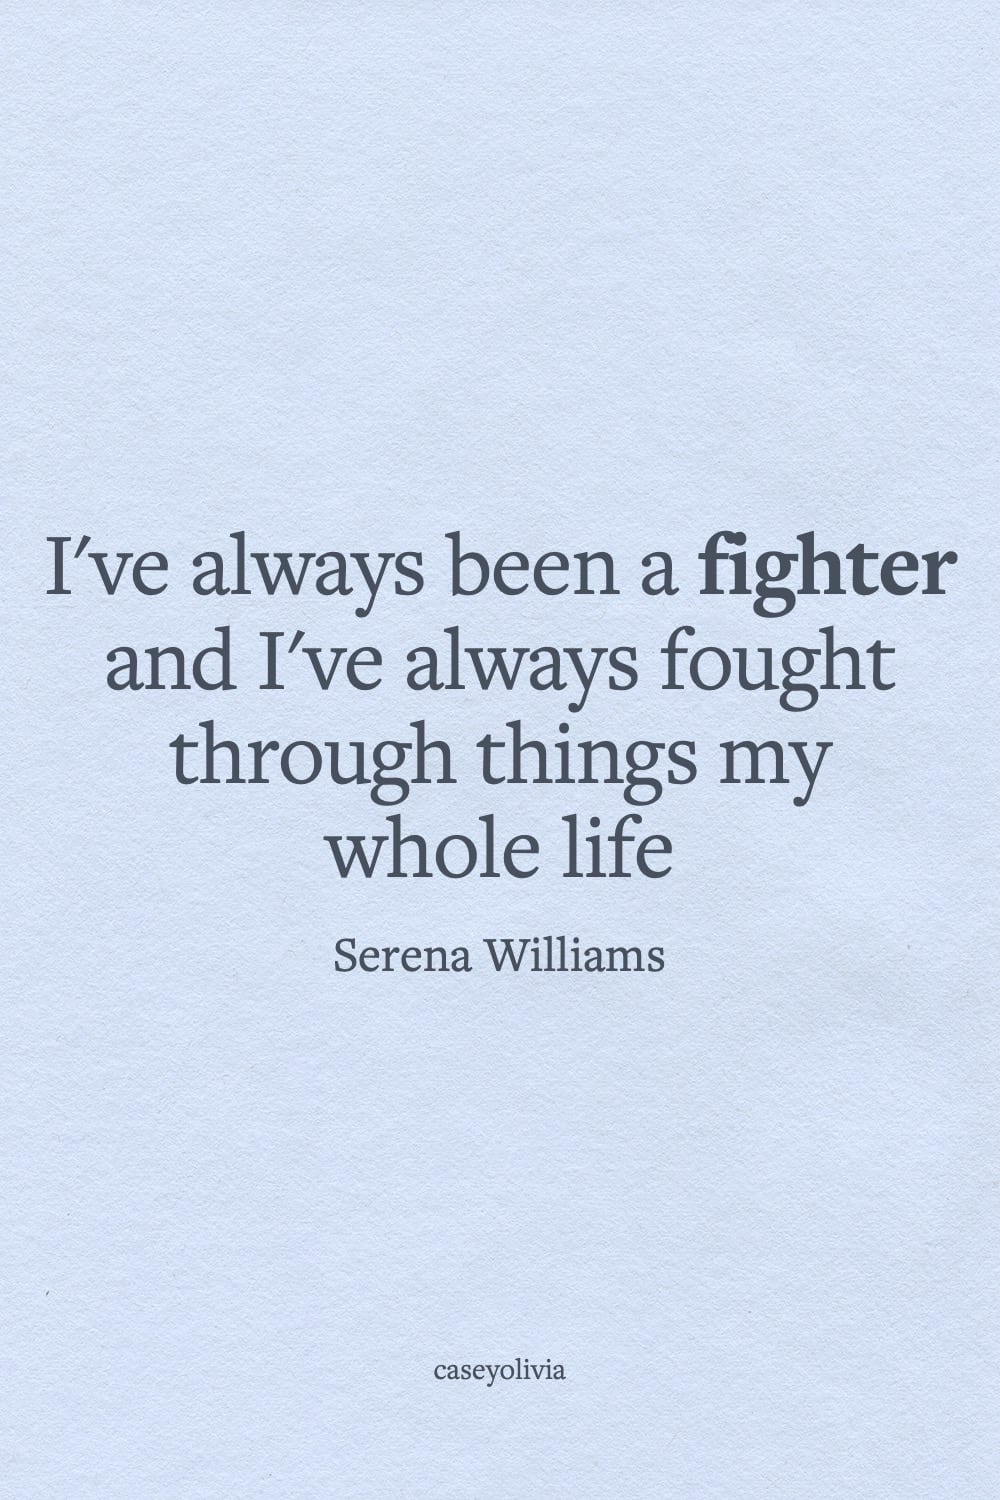 serena williams motivational caption about being a fighter